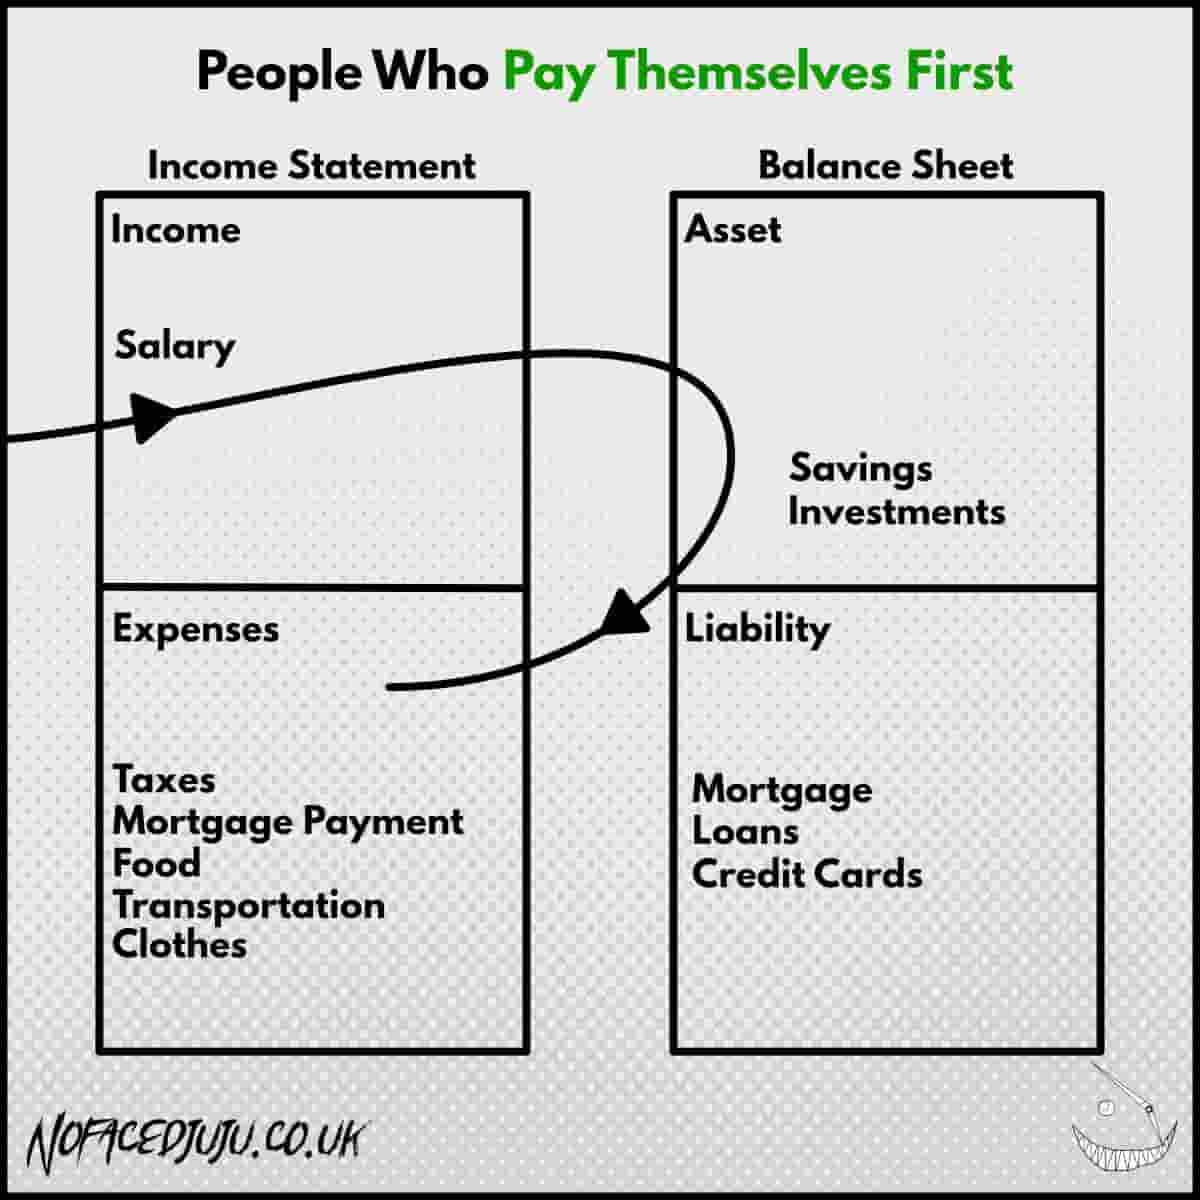 Image Showing The Cash Flow Of People Who Pay Themselves First For Rich Dad Poor Dad